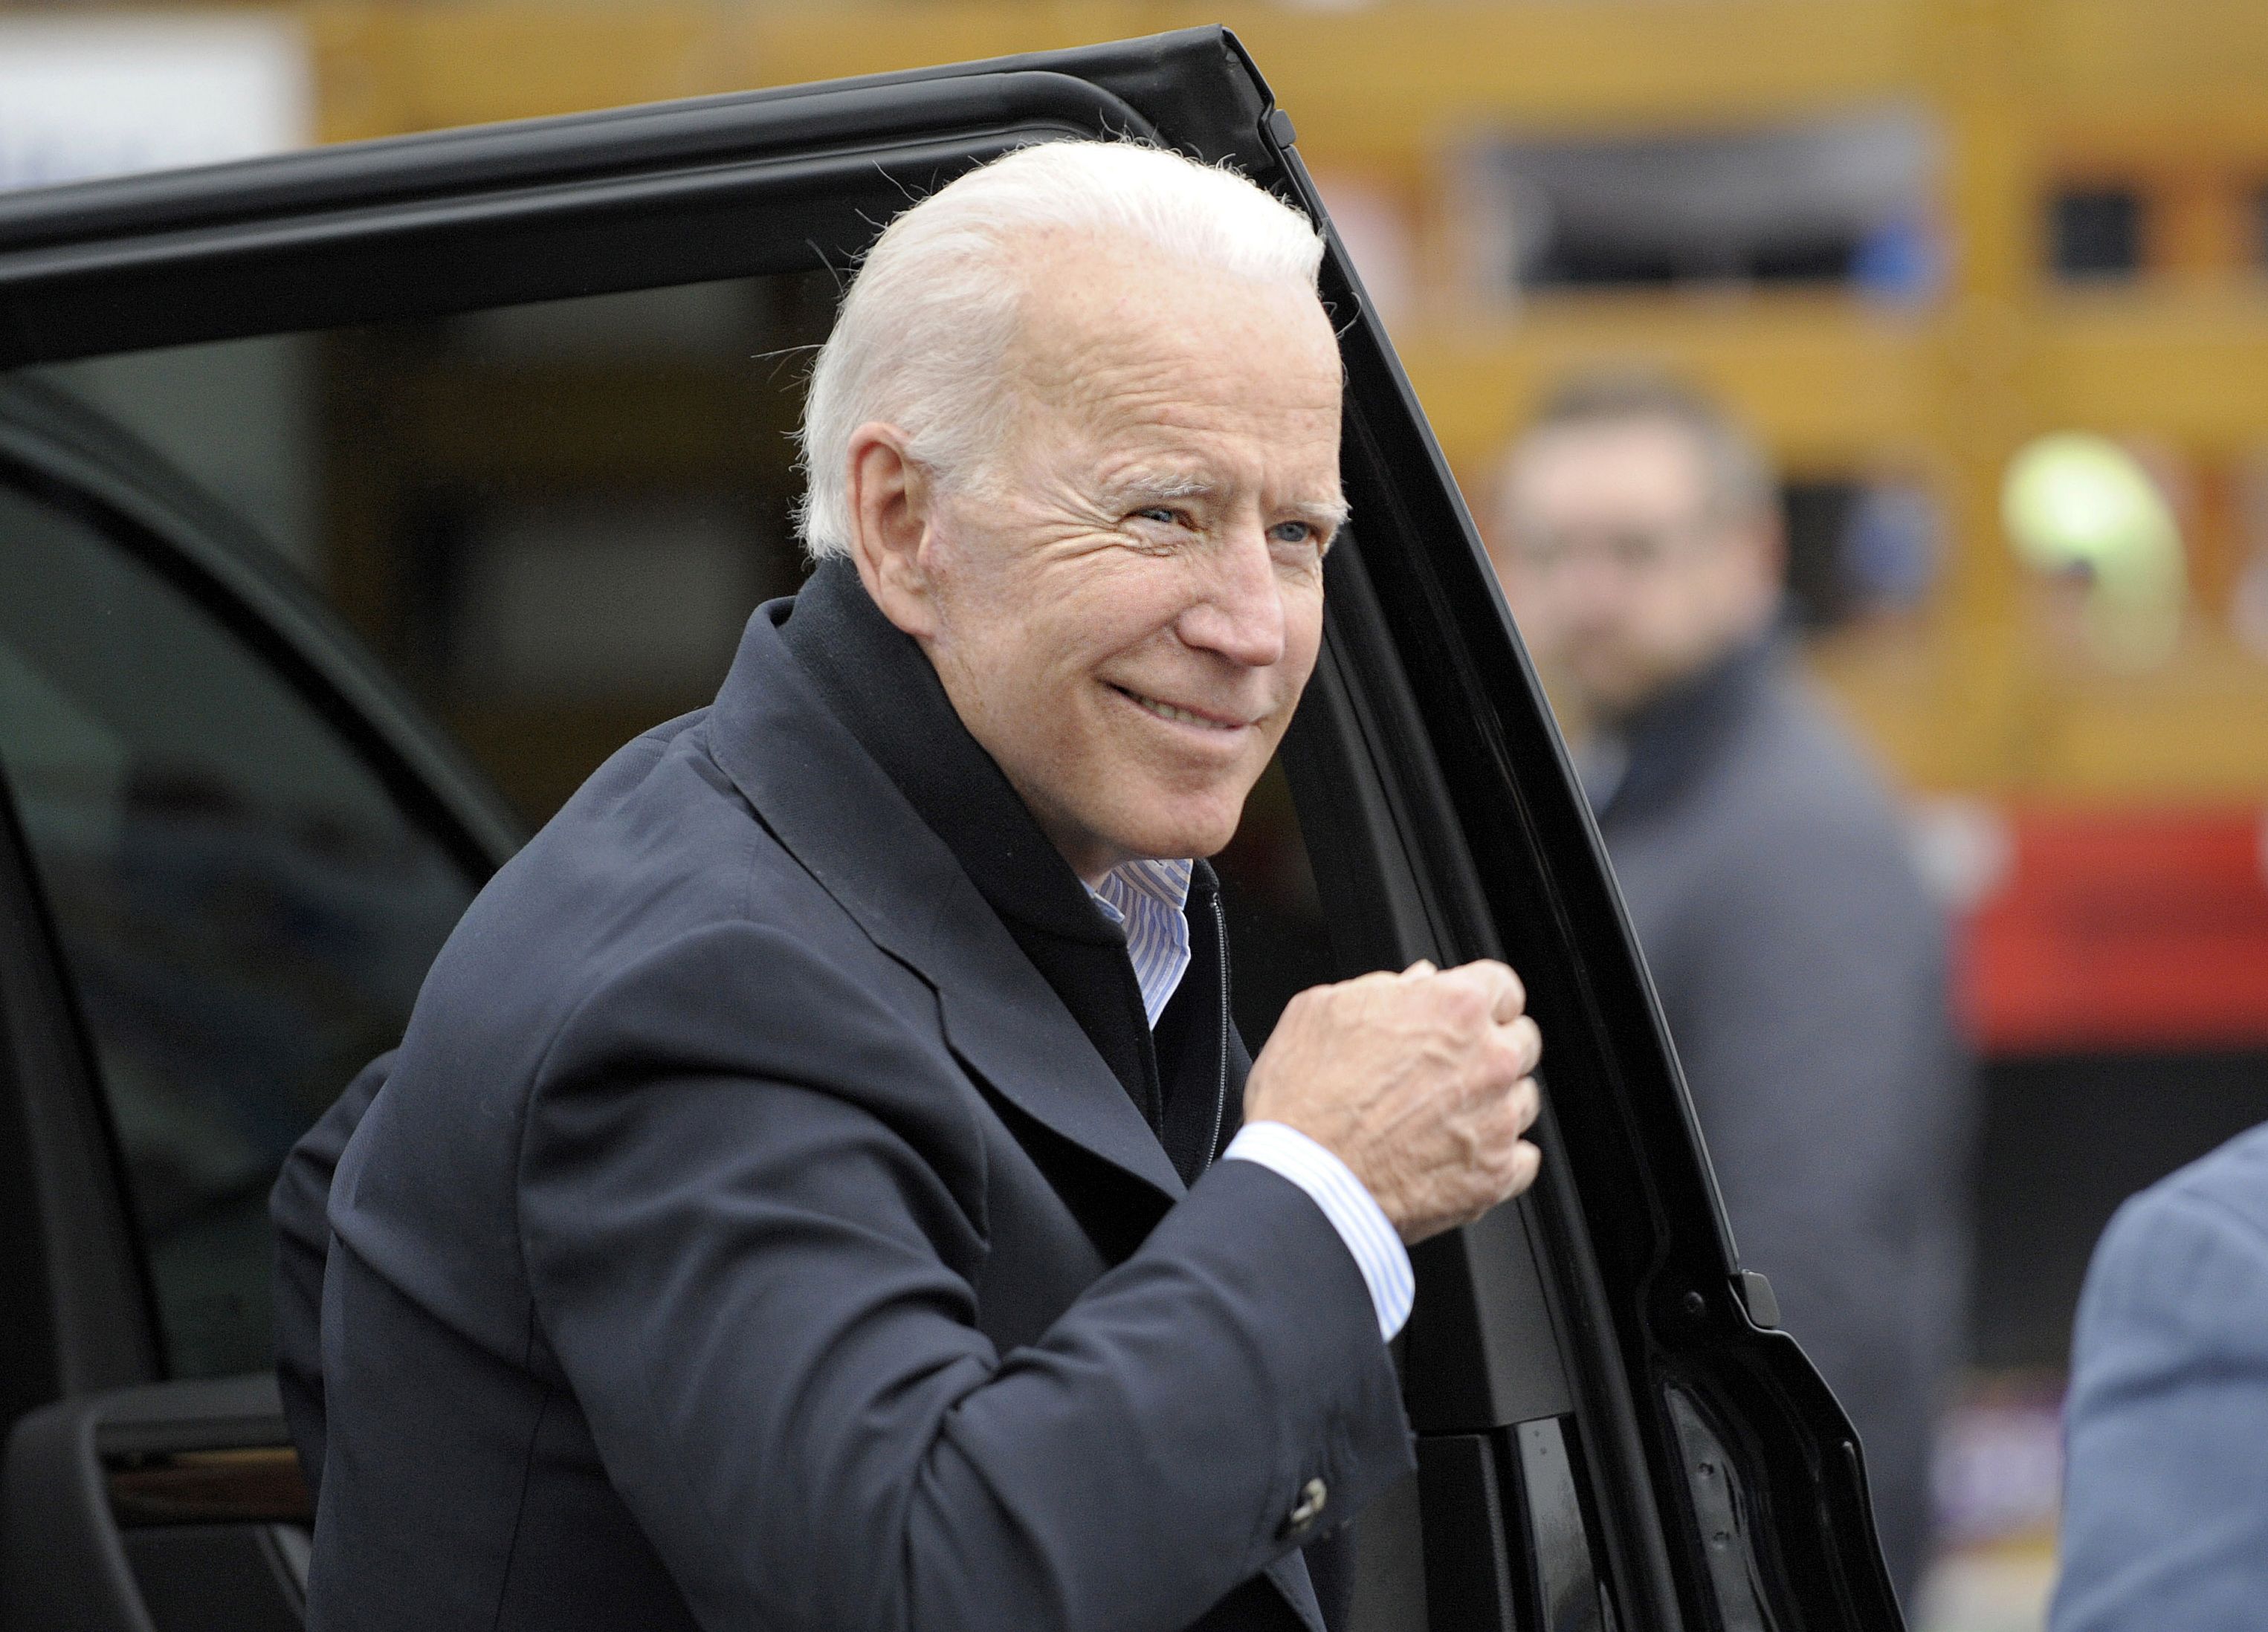 Former vice president Joe Biden arrives at a rally organized by UFCW Union members in Dorchester, Massachusetts, on April 18, 2019. (Joseph Prezioso/ AFP/Getty Images) 